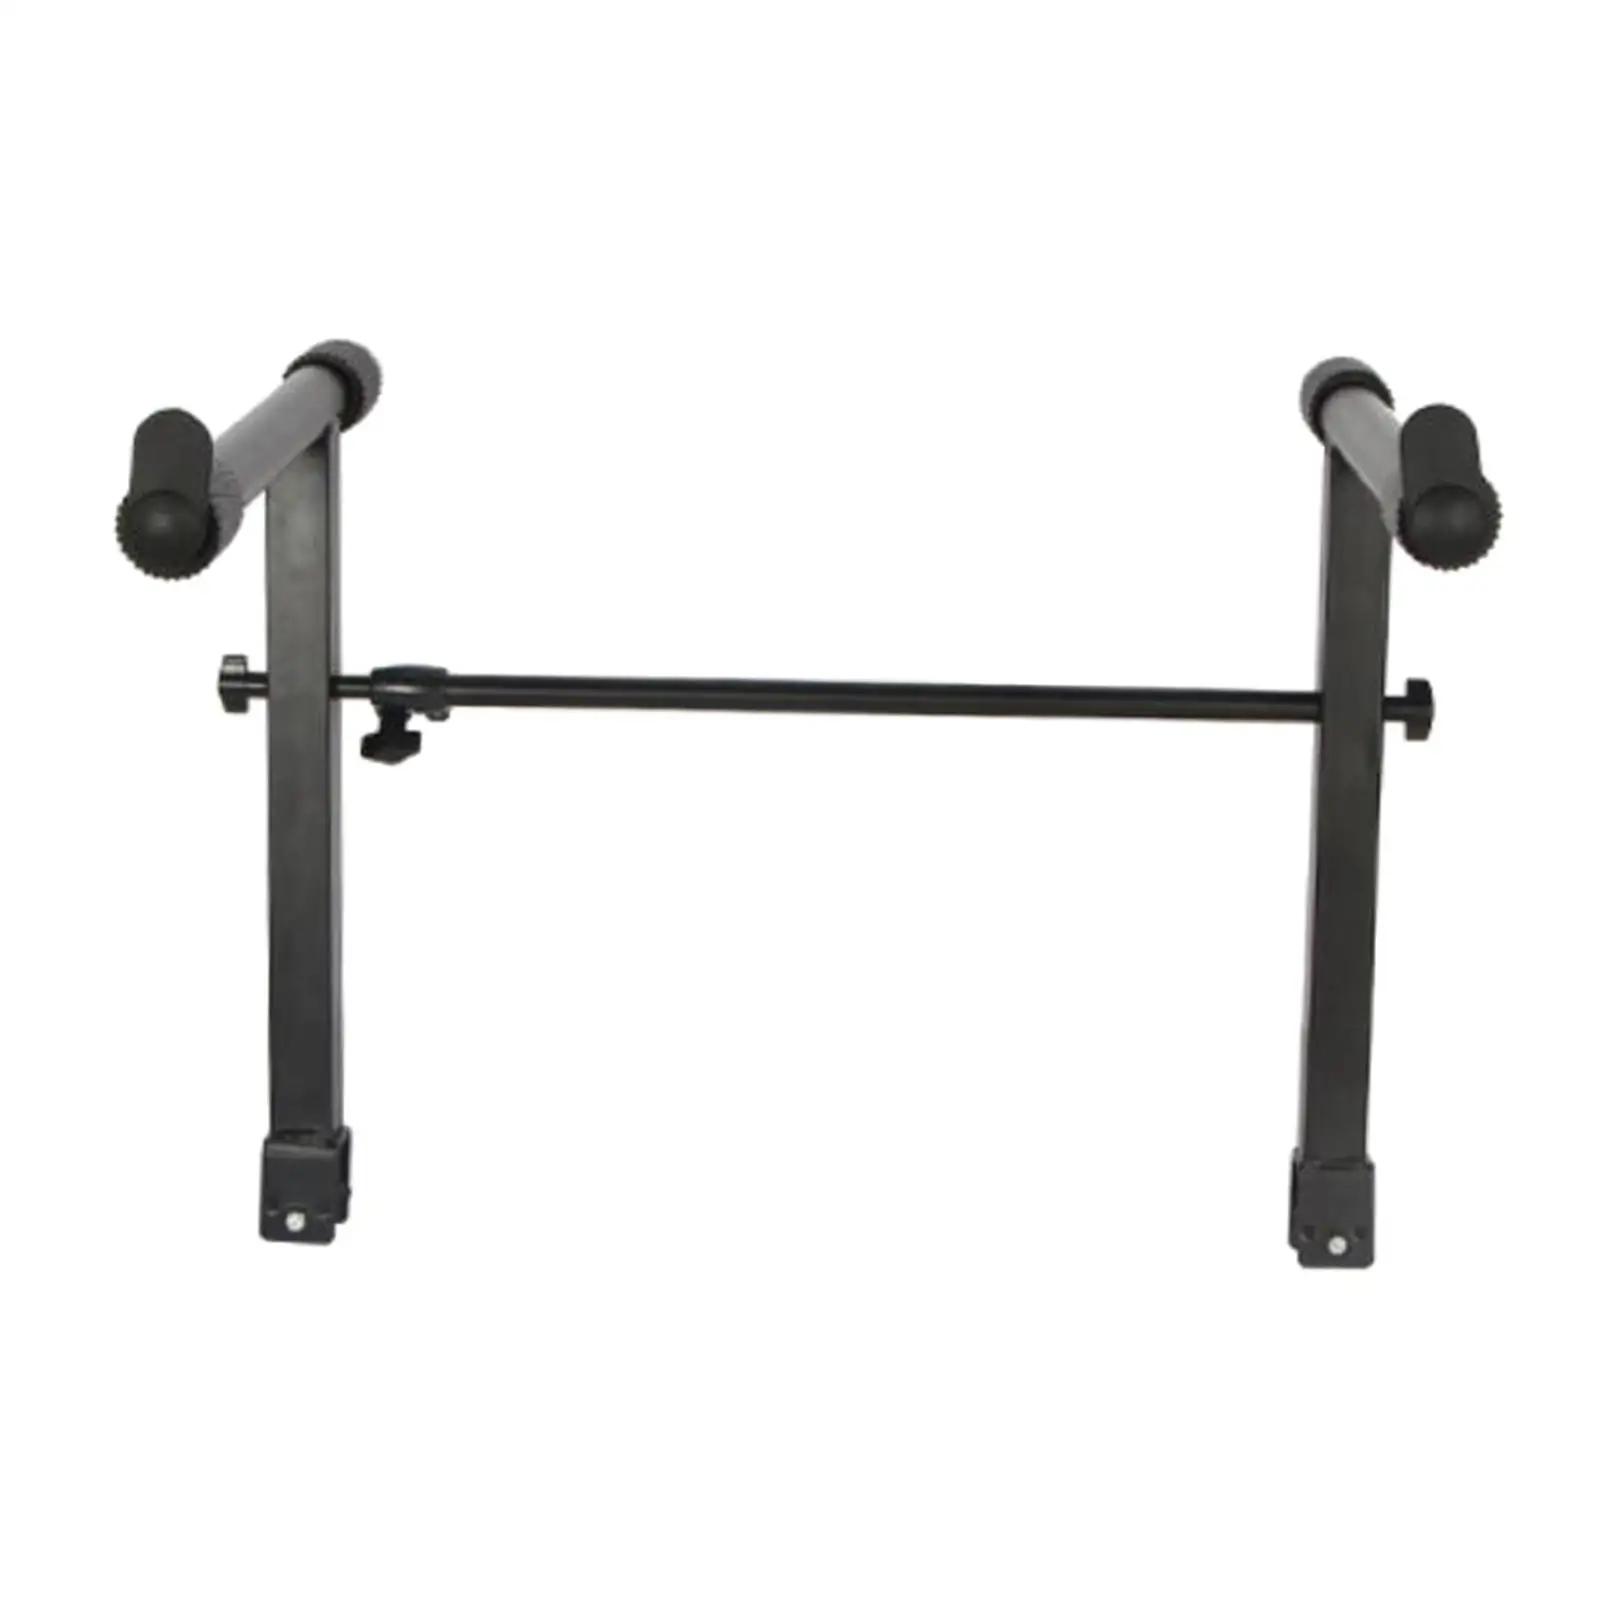 Adjustable Musical Keyboard Stand Heightening Electronic Piano Stand for Keyboard Instrument Accessories